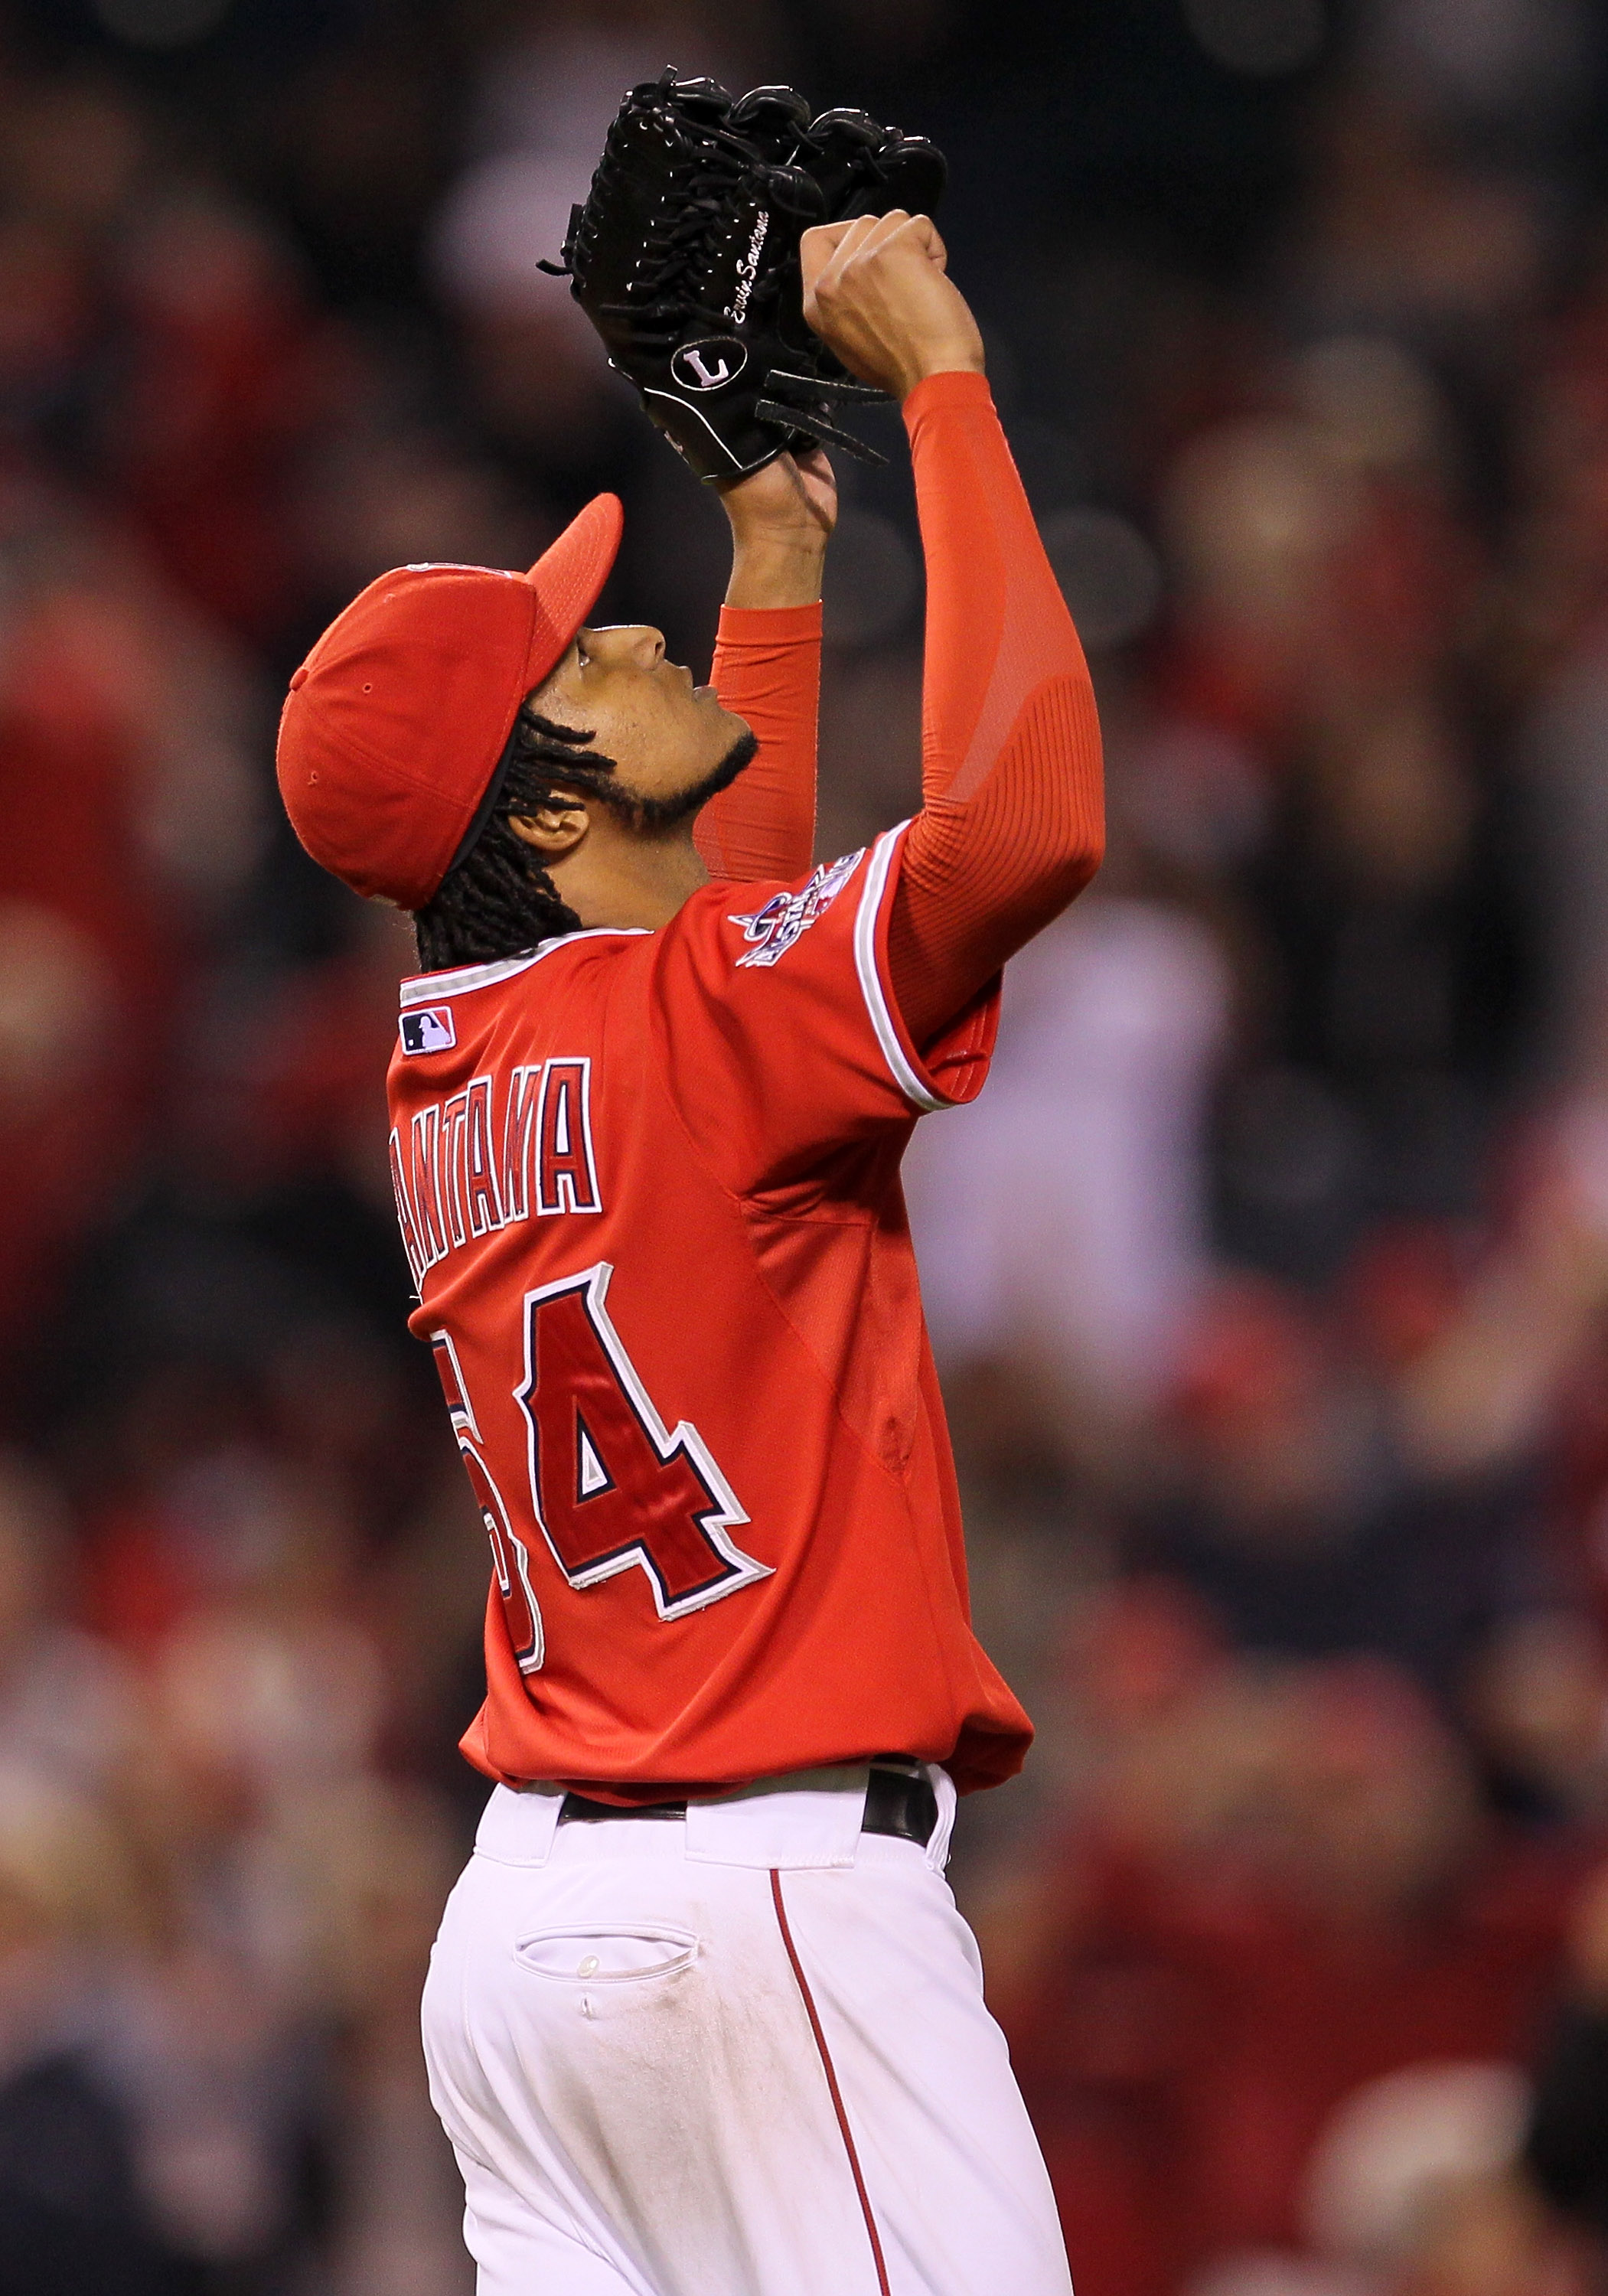 ANAHEIM, CA - SEPTEMBER 21:  Ervin Santana #54 of the Los Angeles Angels of Anaheim celebrates after getting the final out of his complete game shutout against the Texas Rangers on September 21, 2010 at Angel Stadium in Anaheim, California. The Angels won